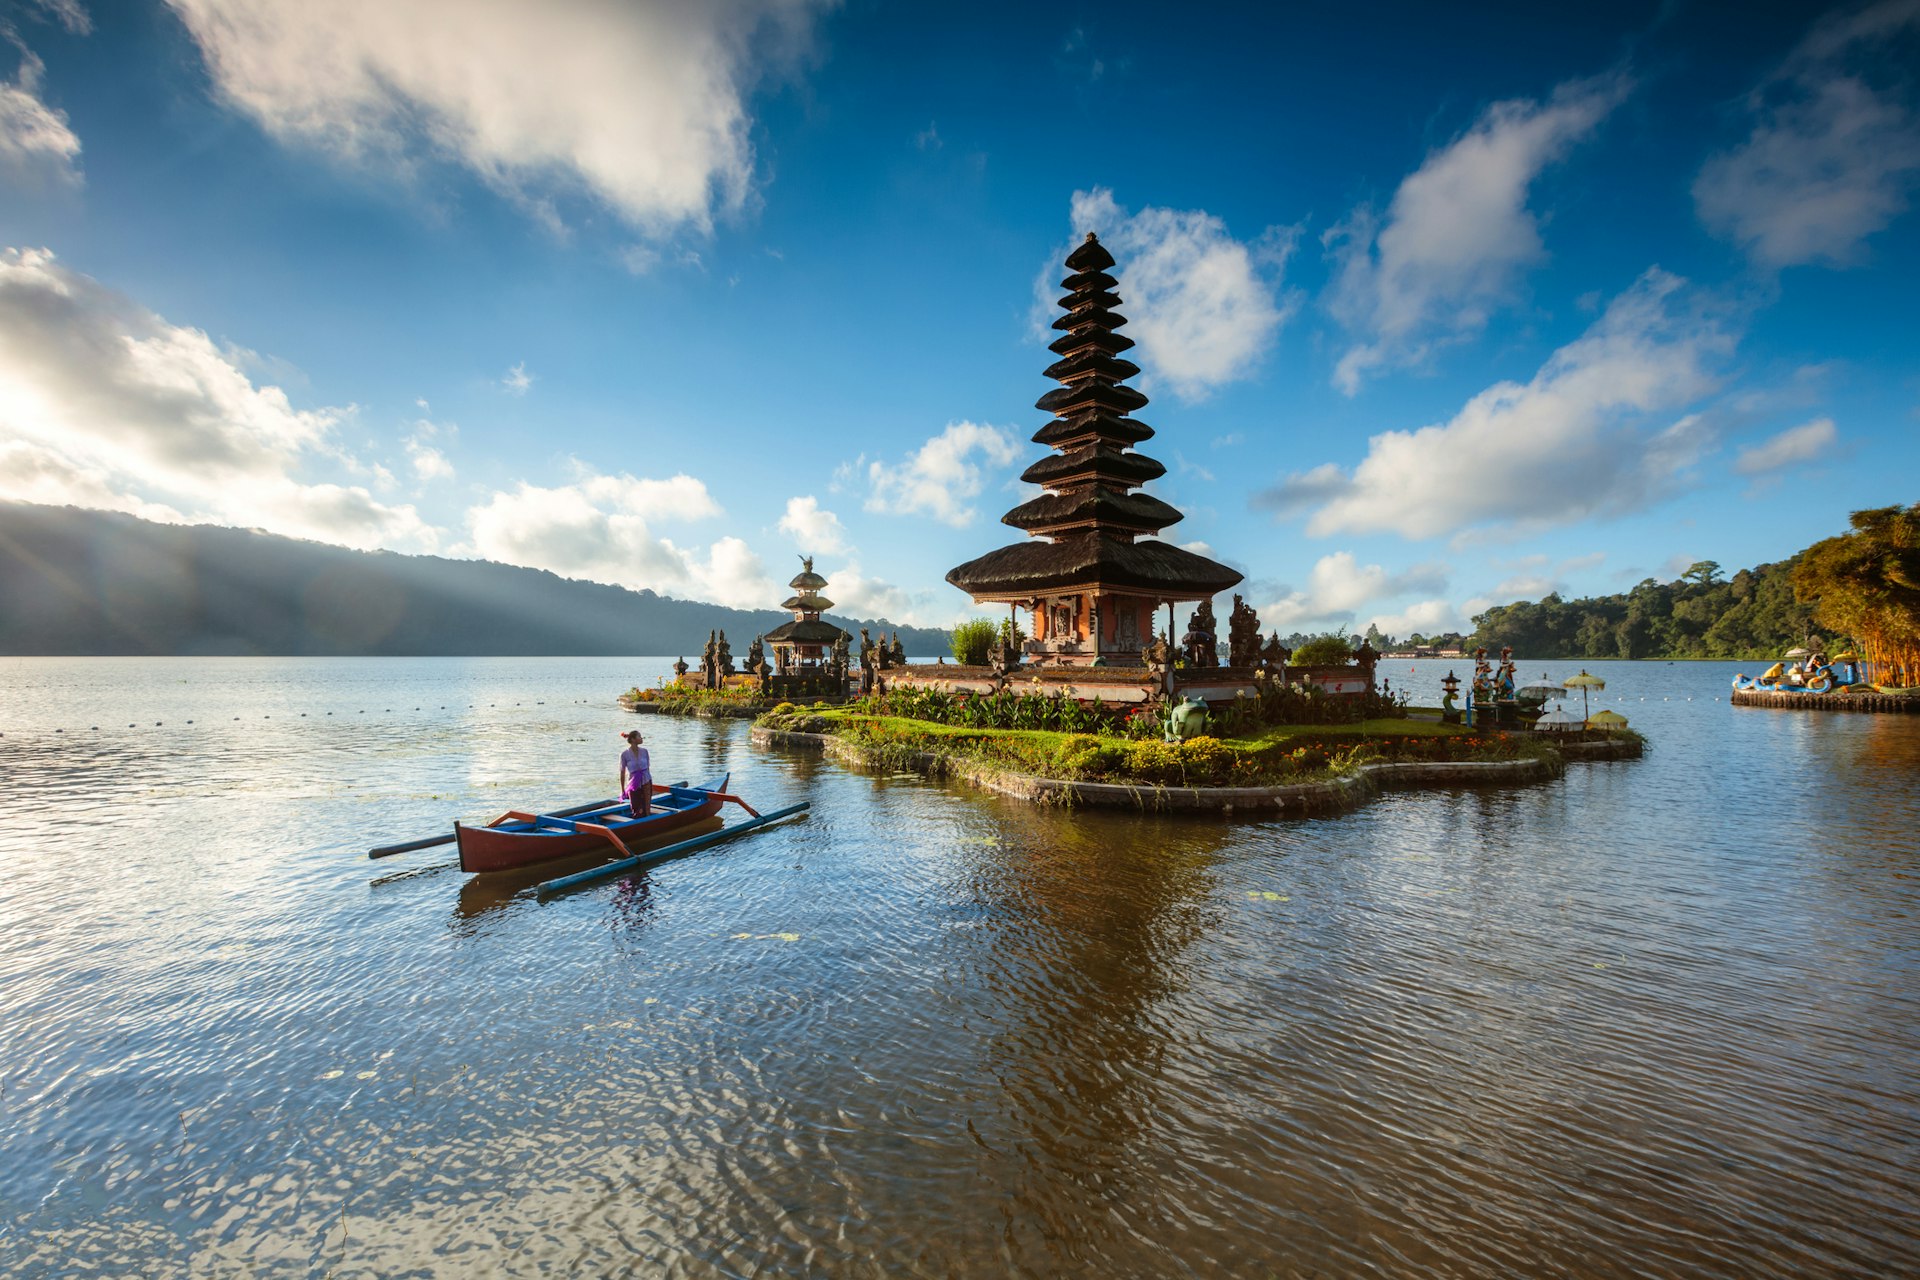 A Balinese woman rows a boat towards the Ulun Danu Beratan temple, Bedugul in Bali, Indonesia with blue skies and fluffy clouds above